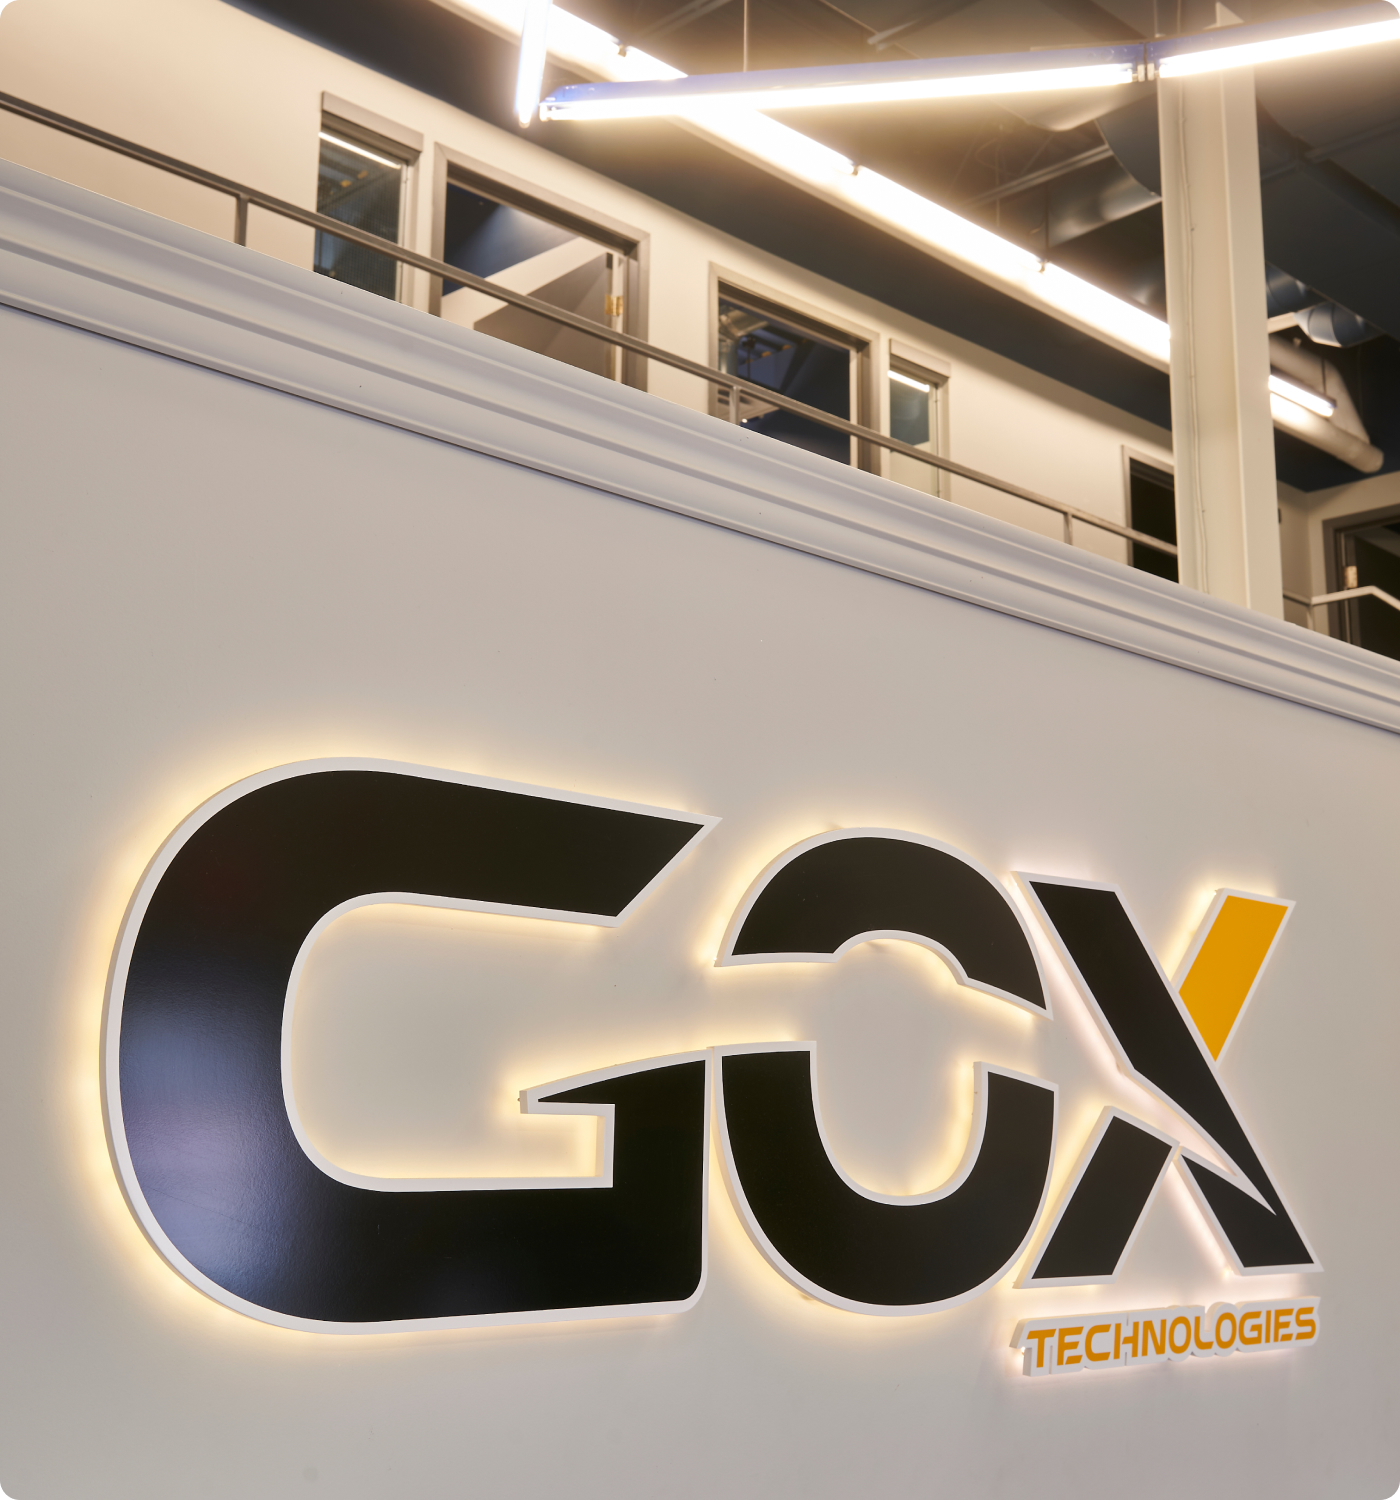 GOX's sign picture